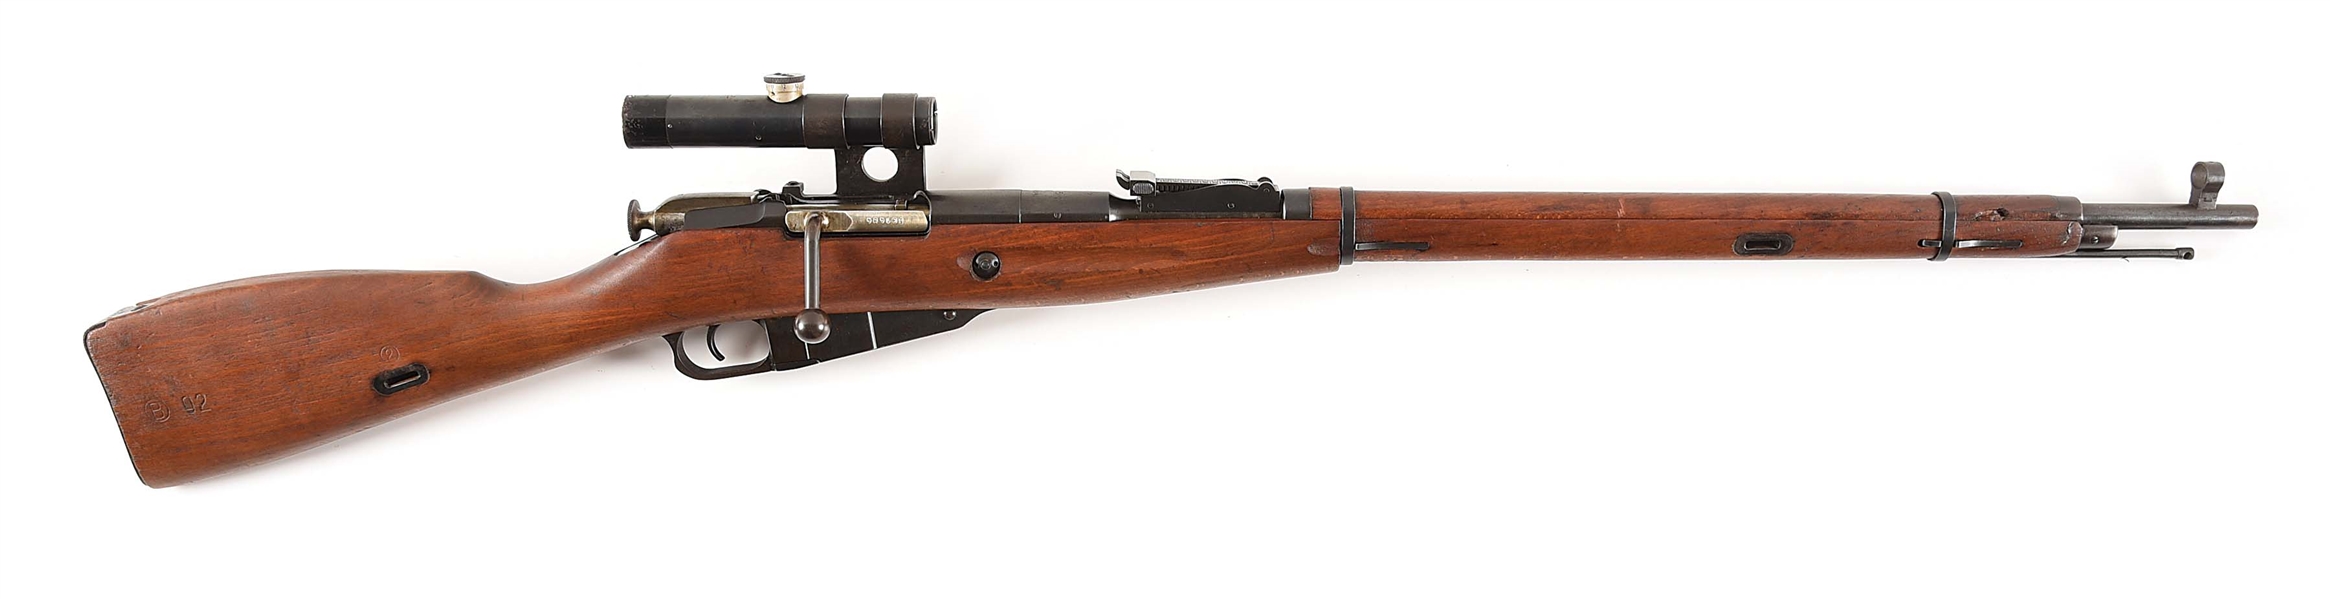 (C) DESIRABLE HUNGARIAN "1952" DATED M52 (91/30 PU) BOLT ACTION SNIPER RIFLE.